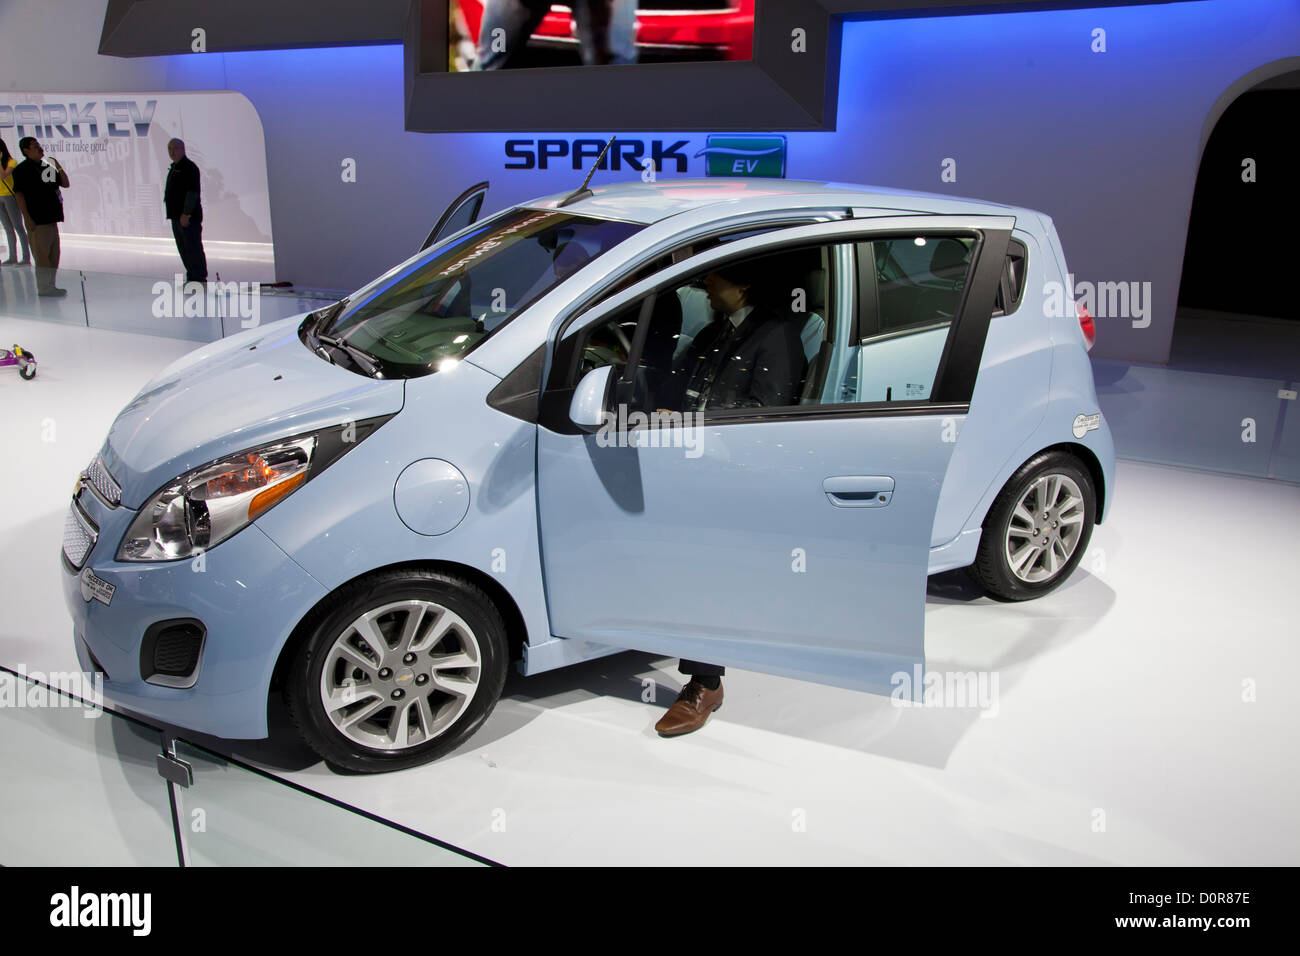 2013 Chevy Spark EV. New 2013 Electric and Hybrid Green cars are featured at the Los Angeles Auto show on November 29, 2012. Los Angeles Convention Center, California, USA Stock Photo